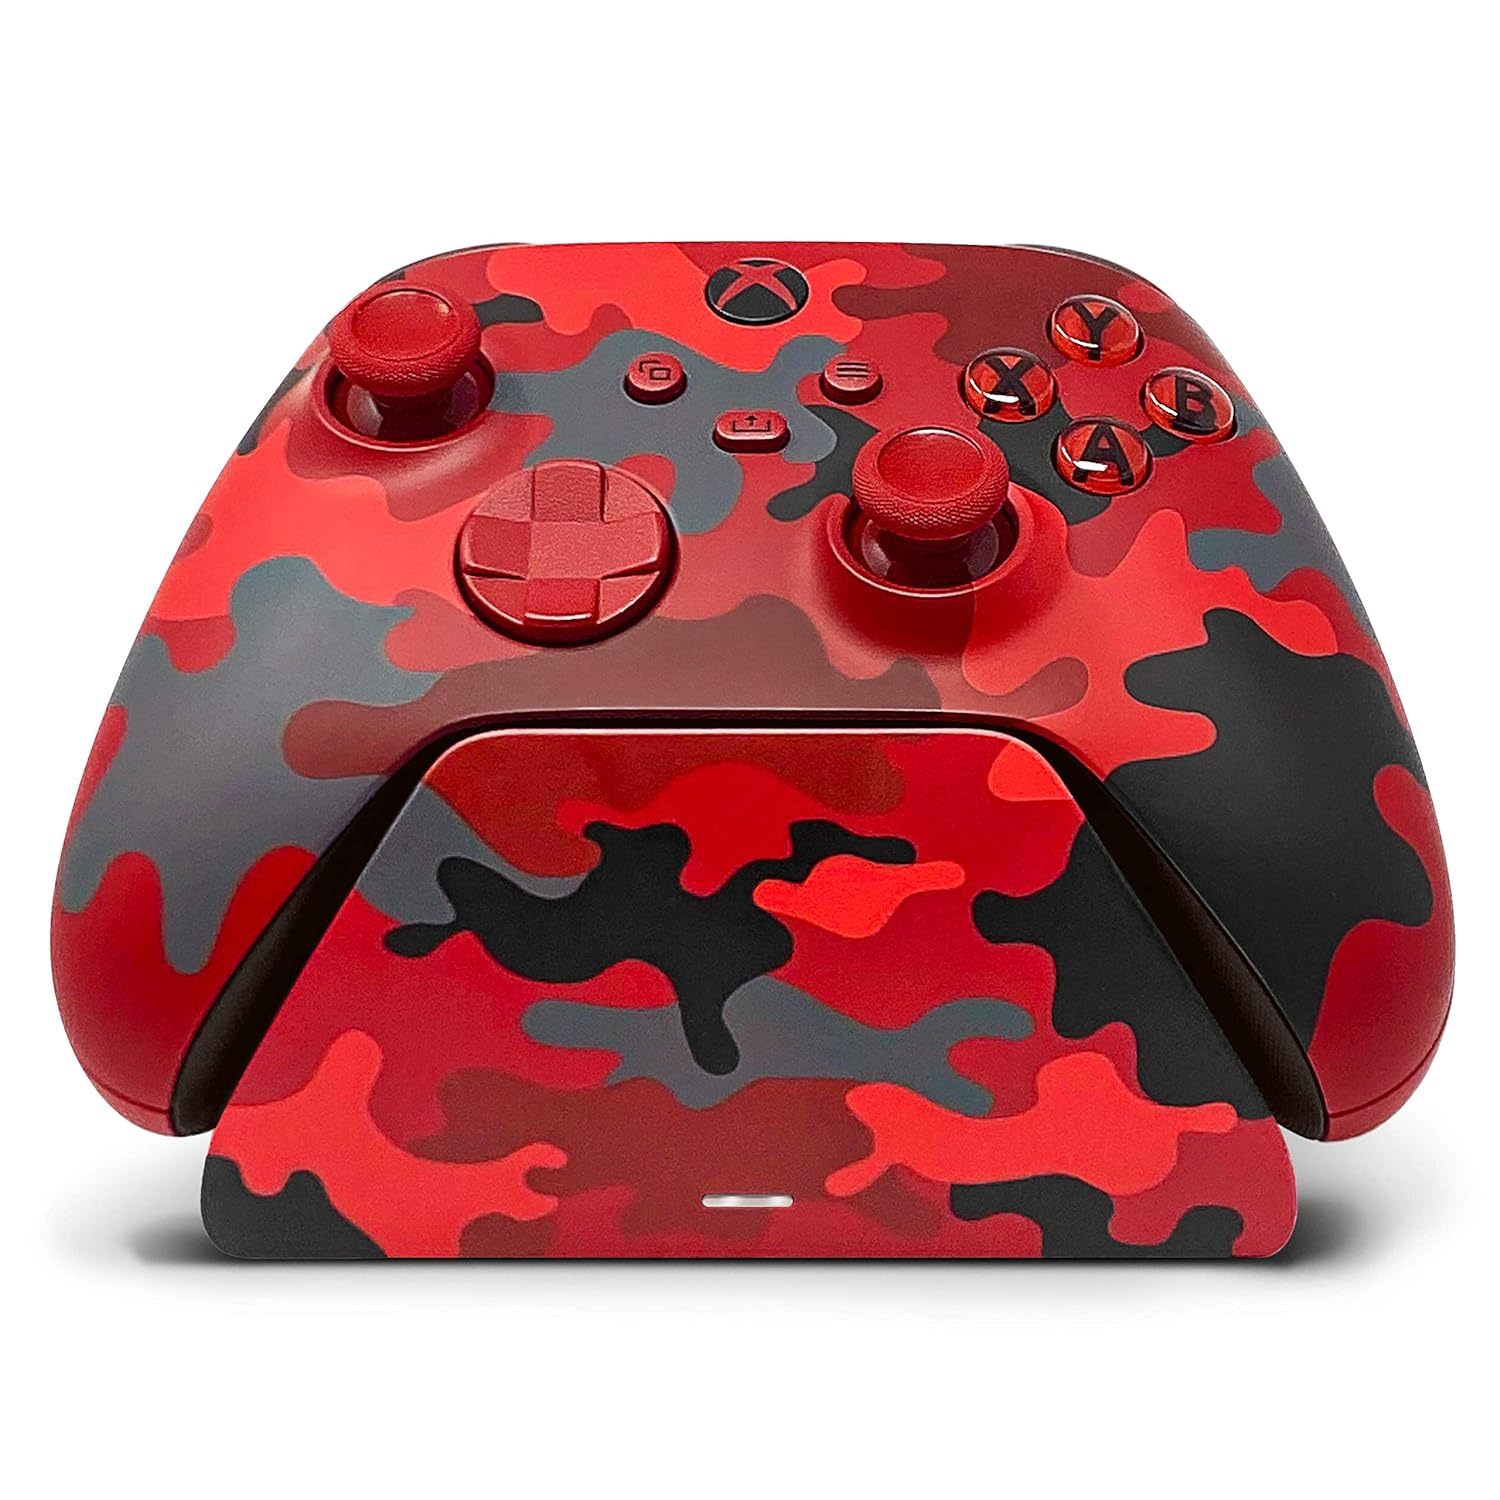 Primary image for Controller Gear Daystrike Camo Universal Xbox Pro Charging Stand, Charging Dock,